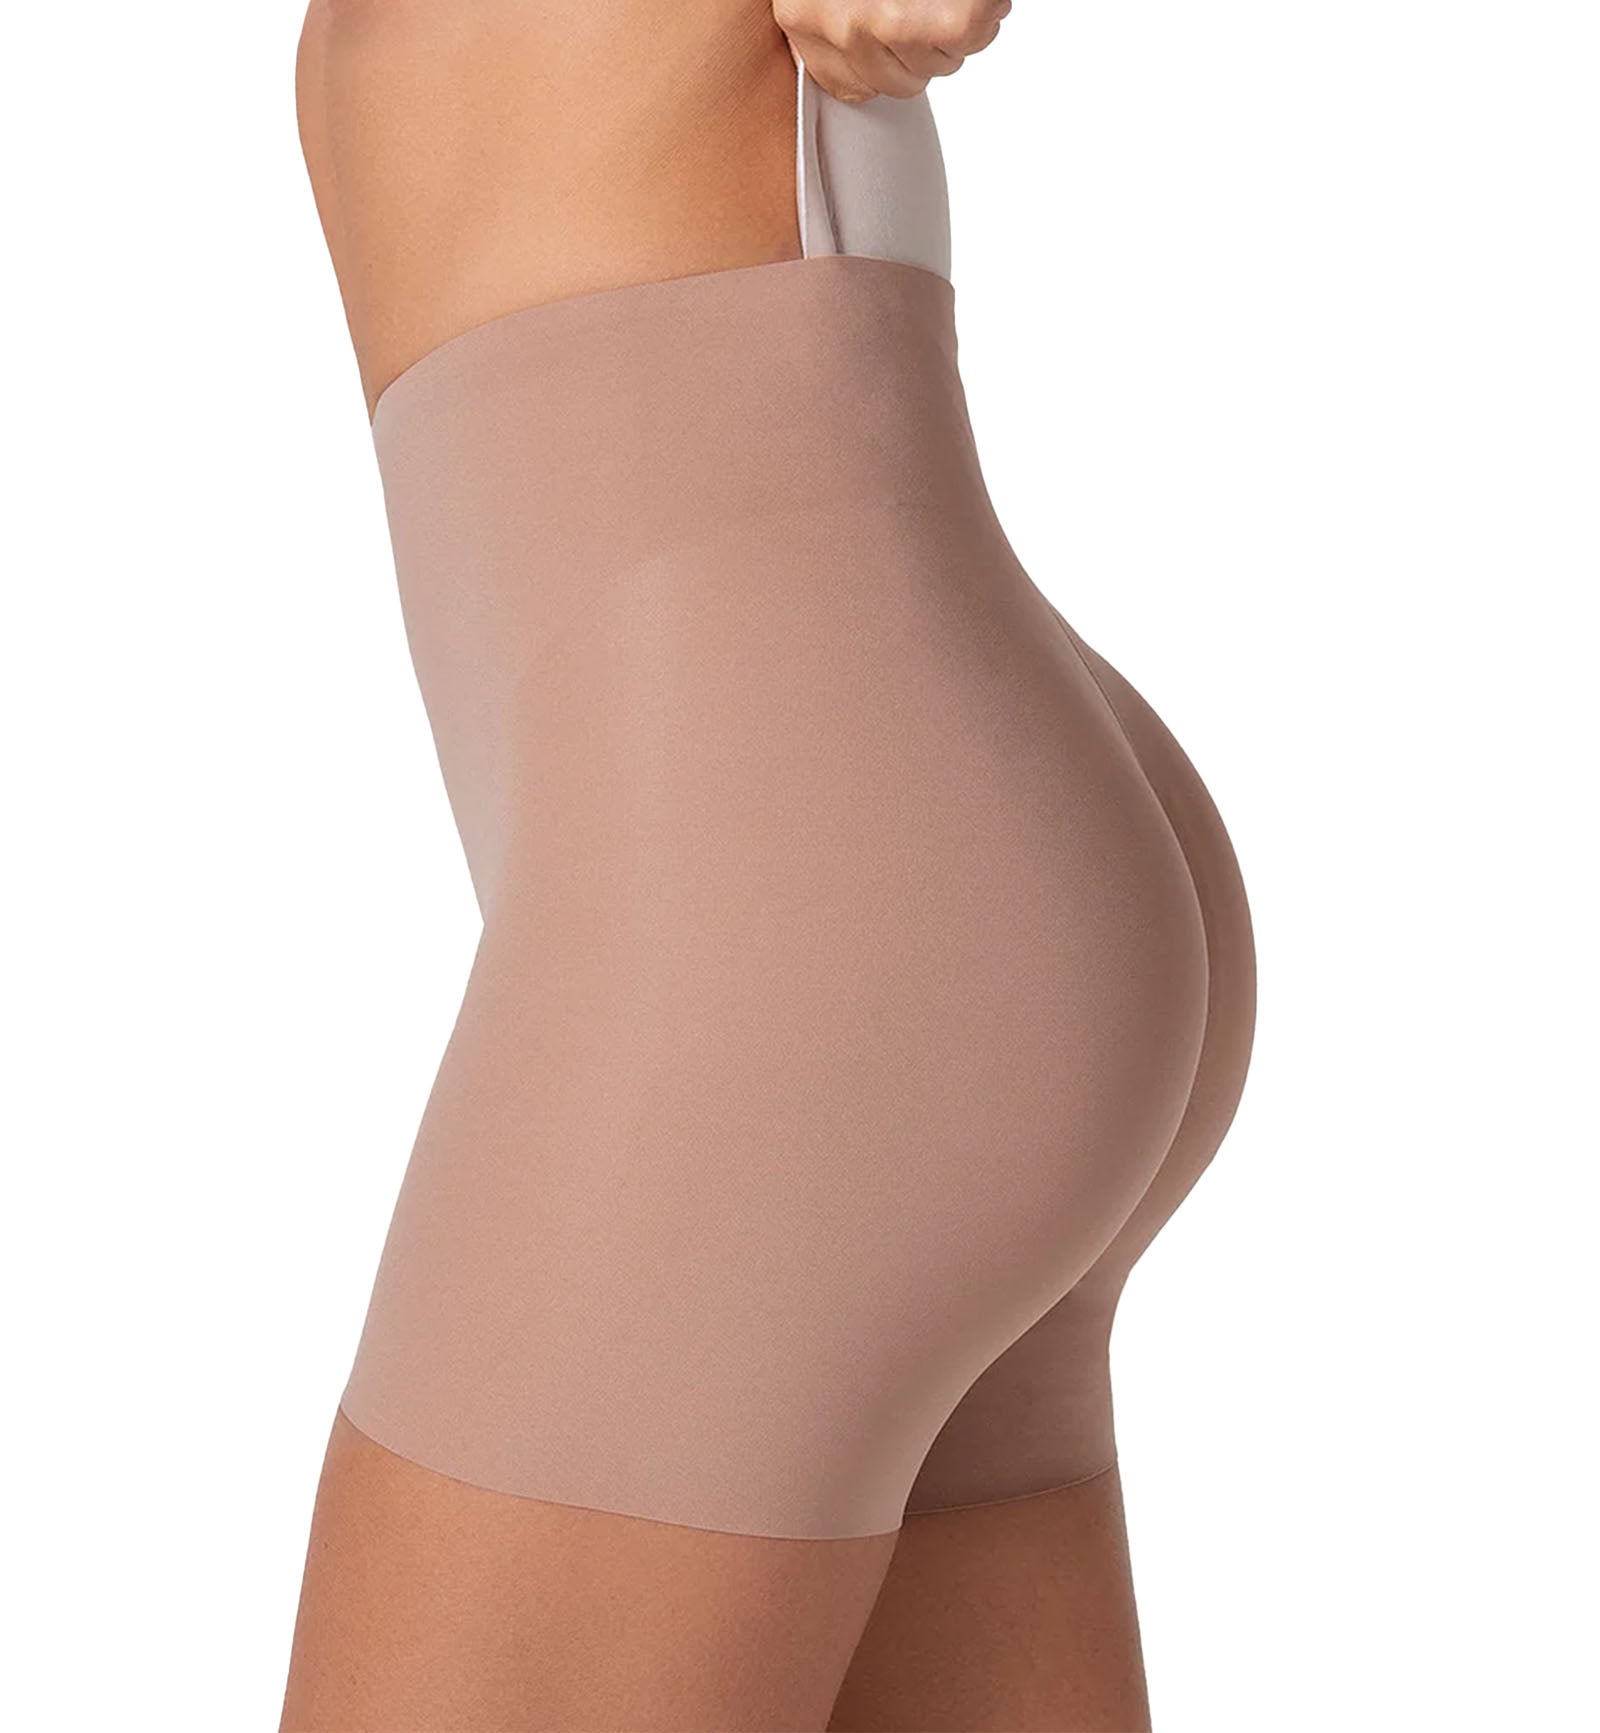 Leonisa Undetectable Padded Booty Lifter Shaper Short (012889),Small,Brown - Brown,Small